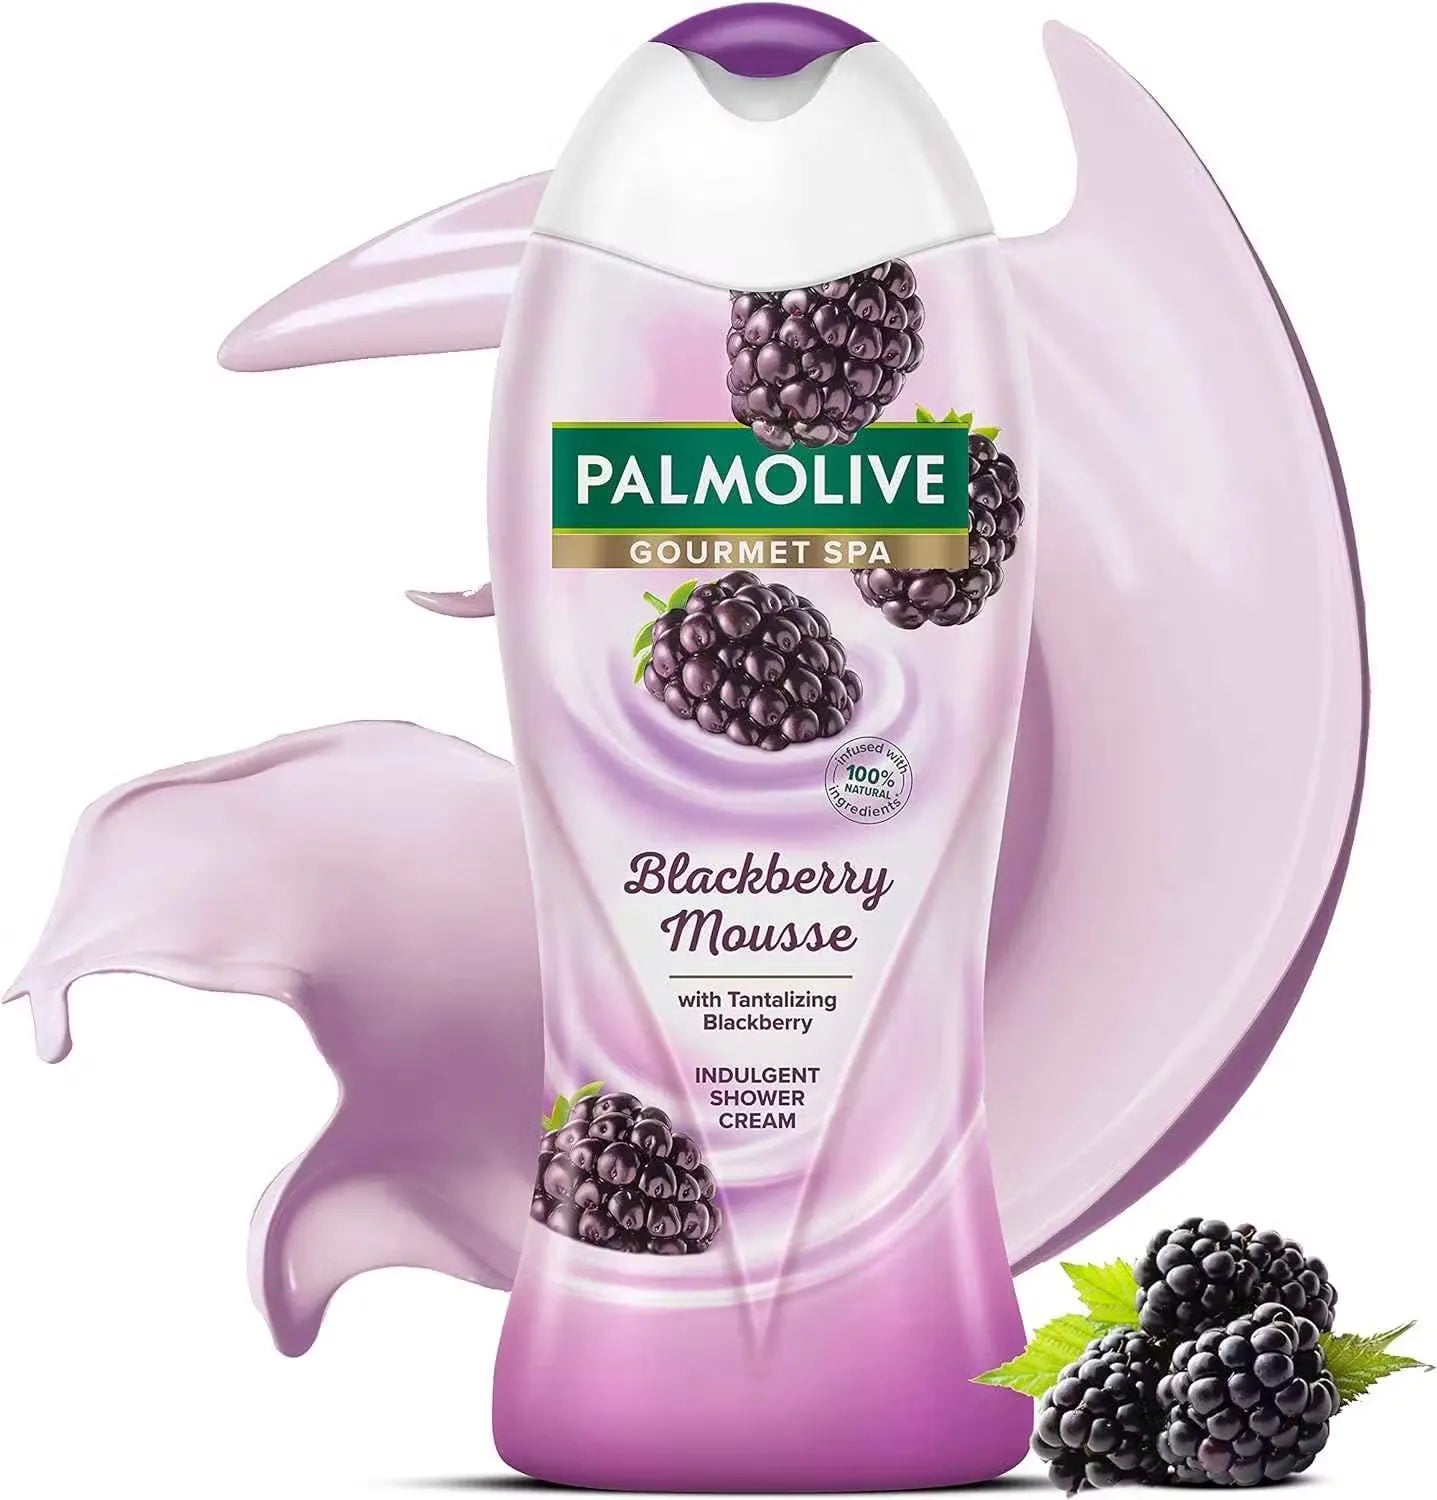 Purple bottle with silver pump dispensing rich, lathery Palmolive Blackberry Shower Gel onto a hand. Blackberries and leaves in the background.